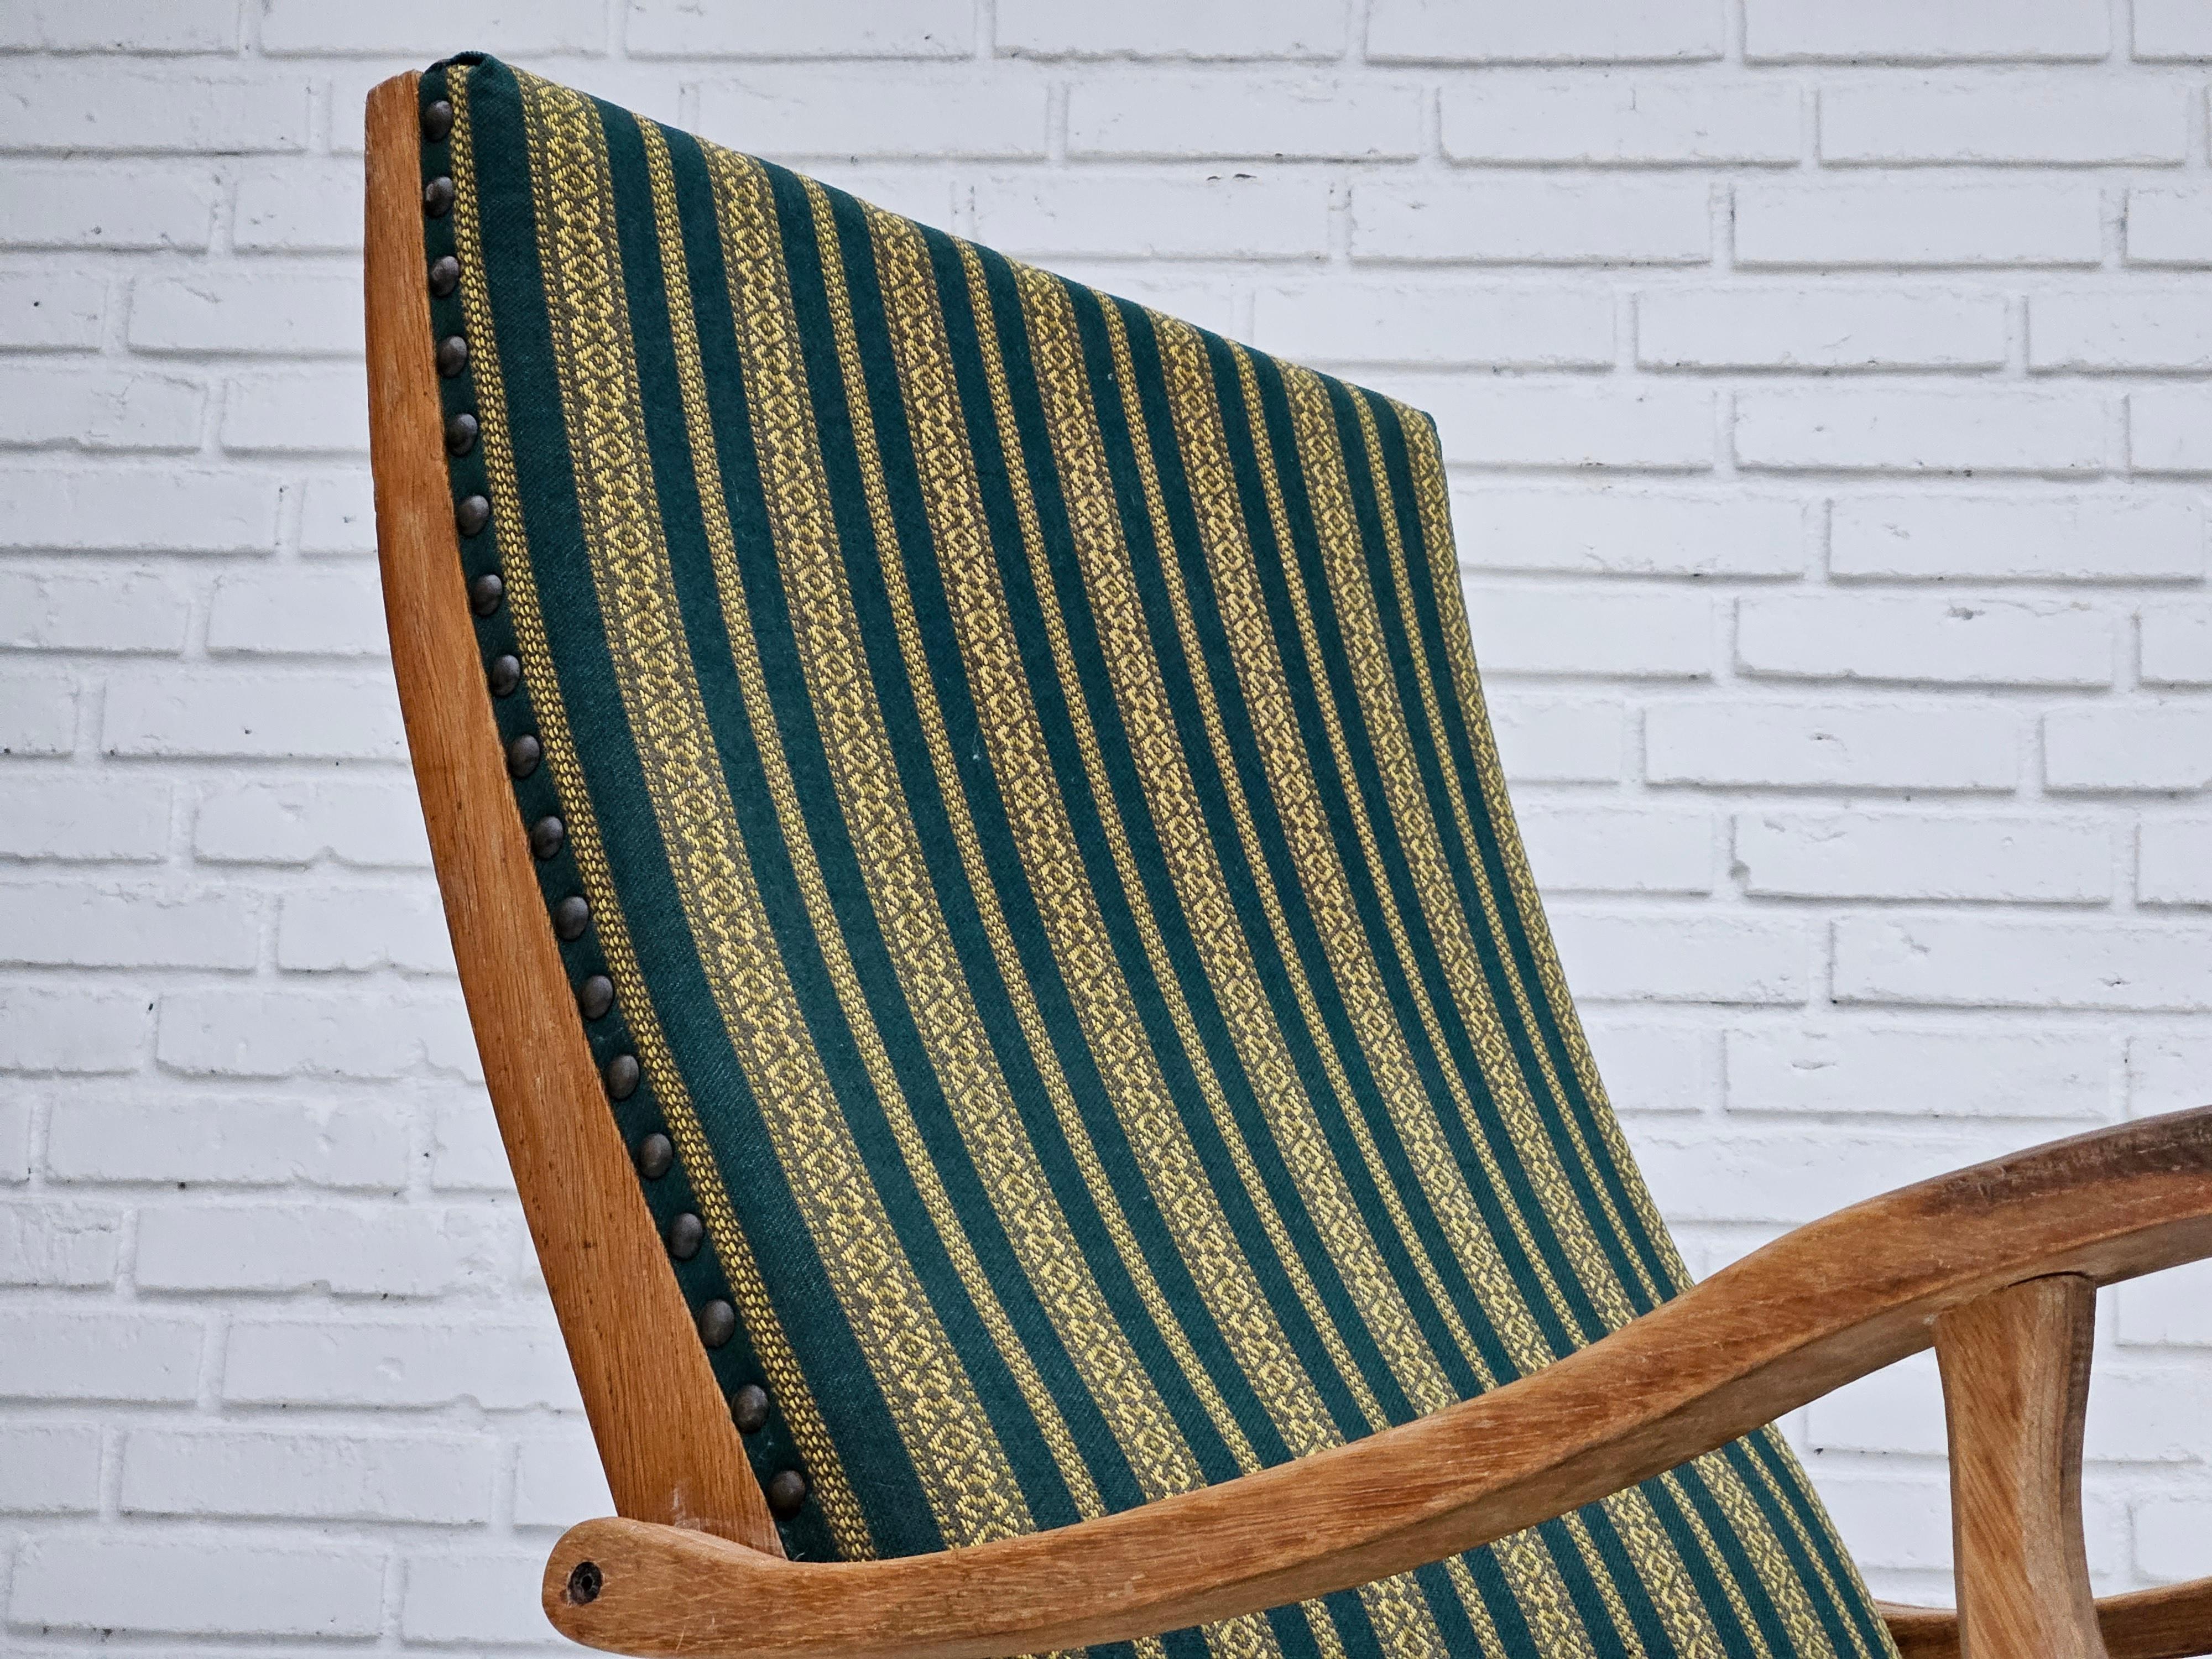 Wool 1950-60s, Danish highback rocking chair, original very good condition. For Sale